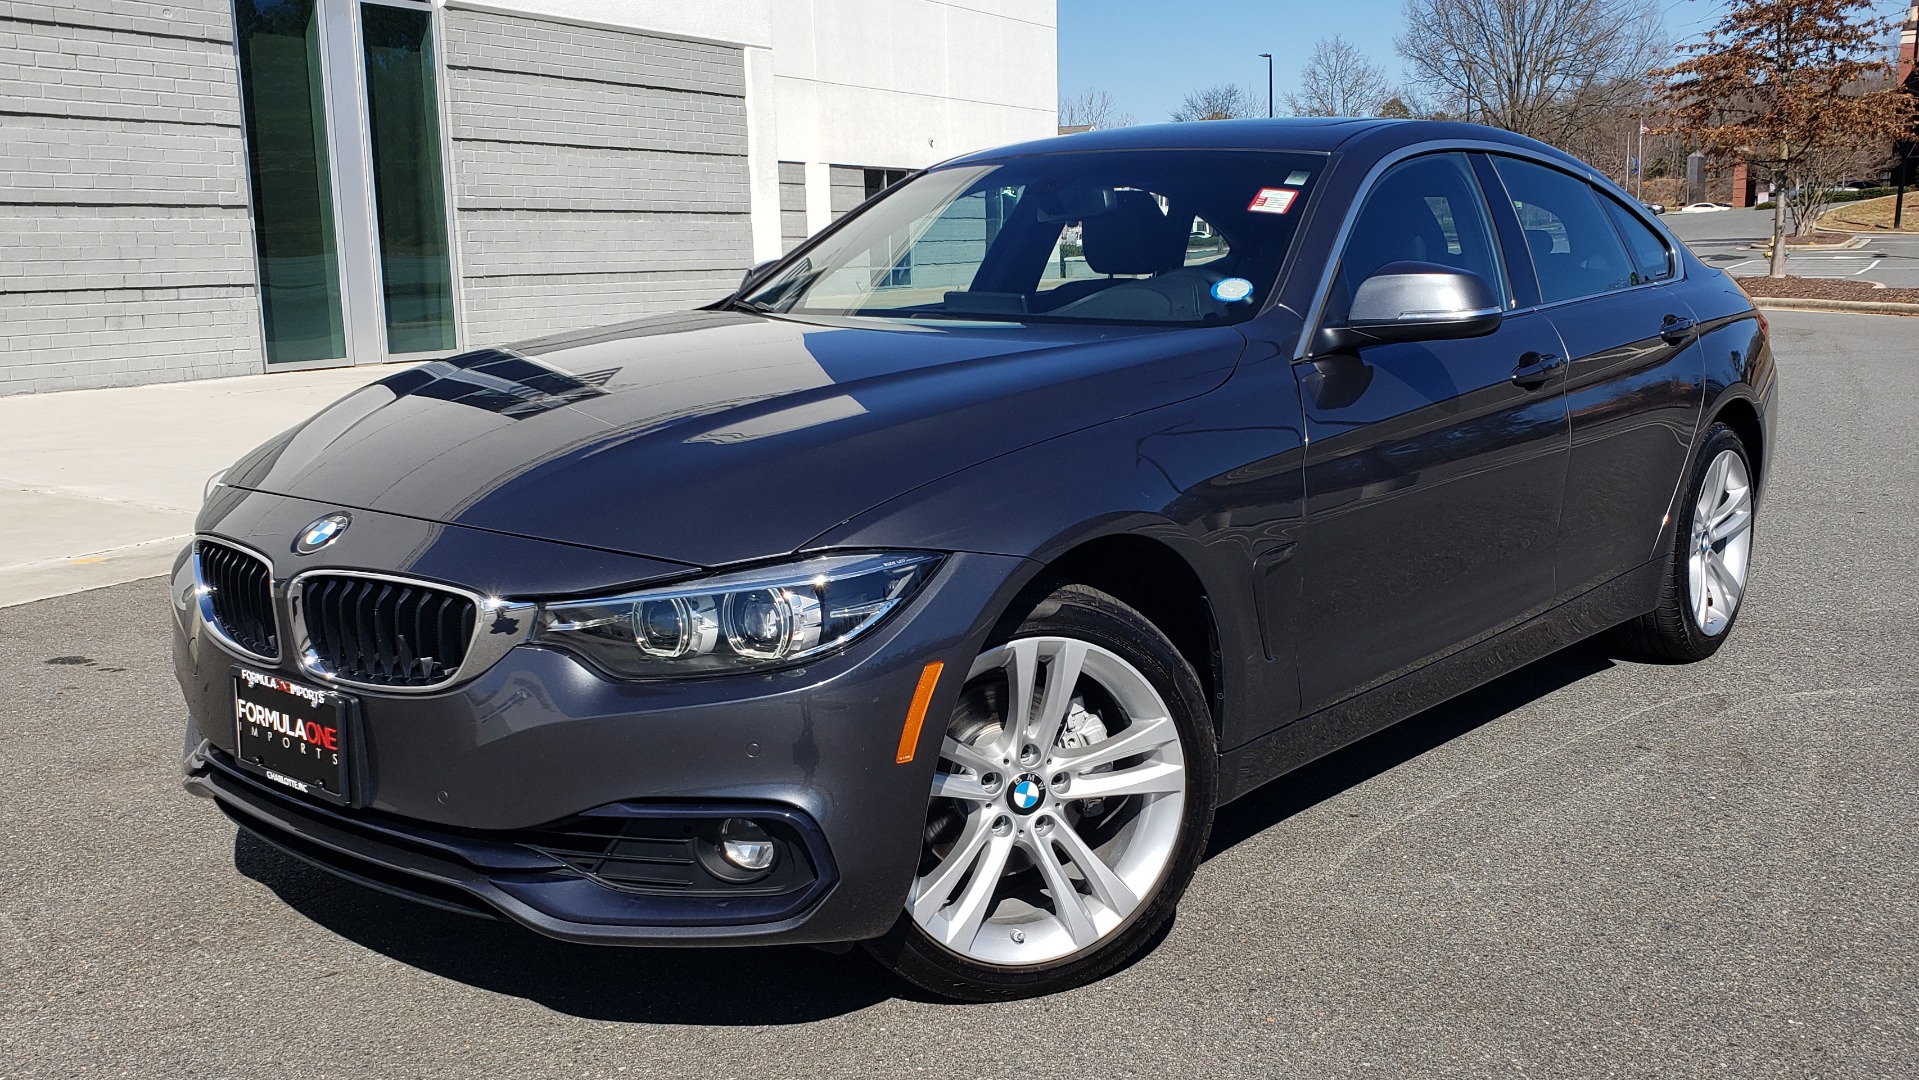 Used 2018 BMW 4 SERIES 430IXDRIVE / PREMIUM / NAV / SUNROOF / ESSENTIALS PKG for sale Sold at Formula Imports in Charlotte NC 28227 1